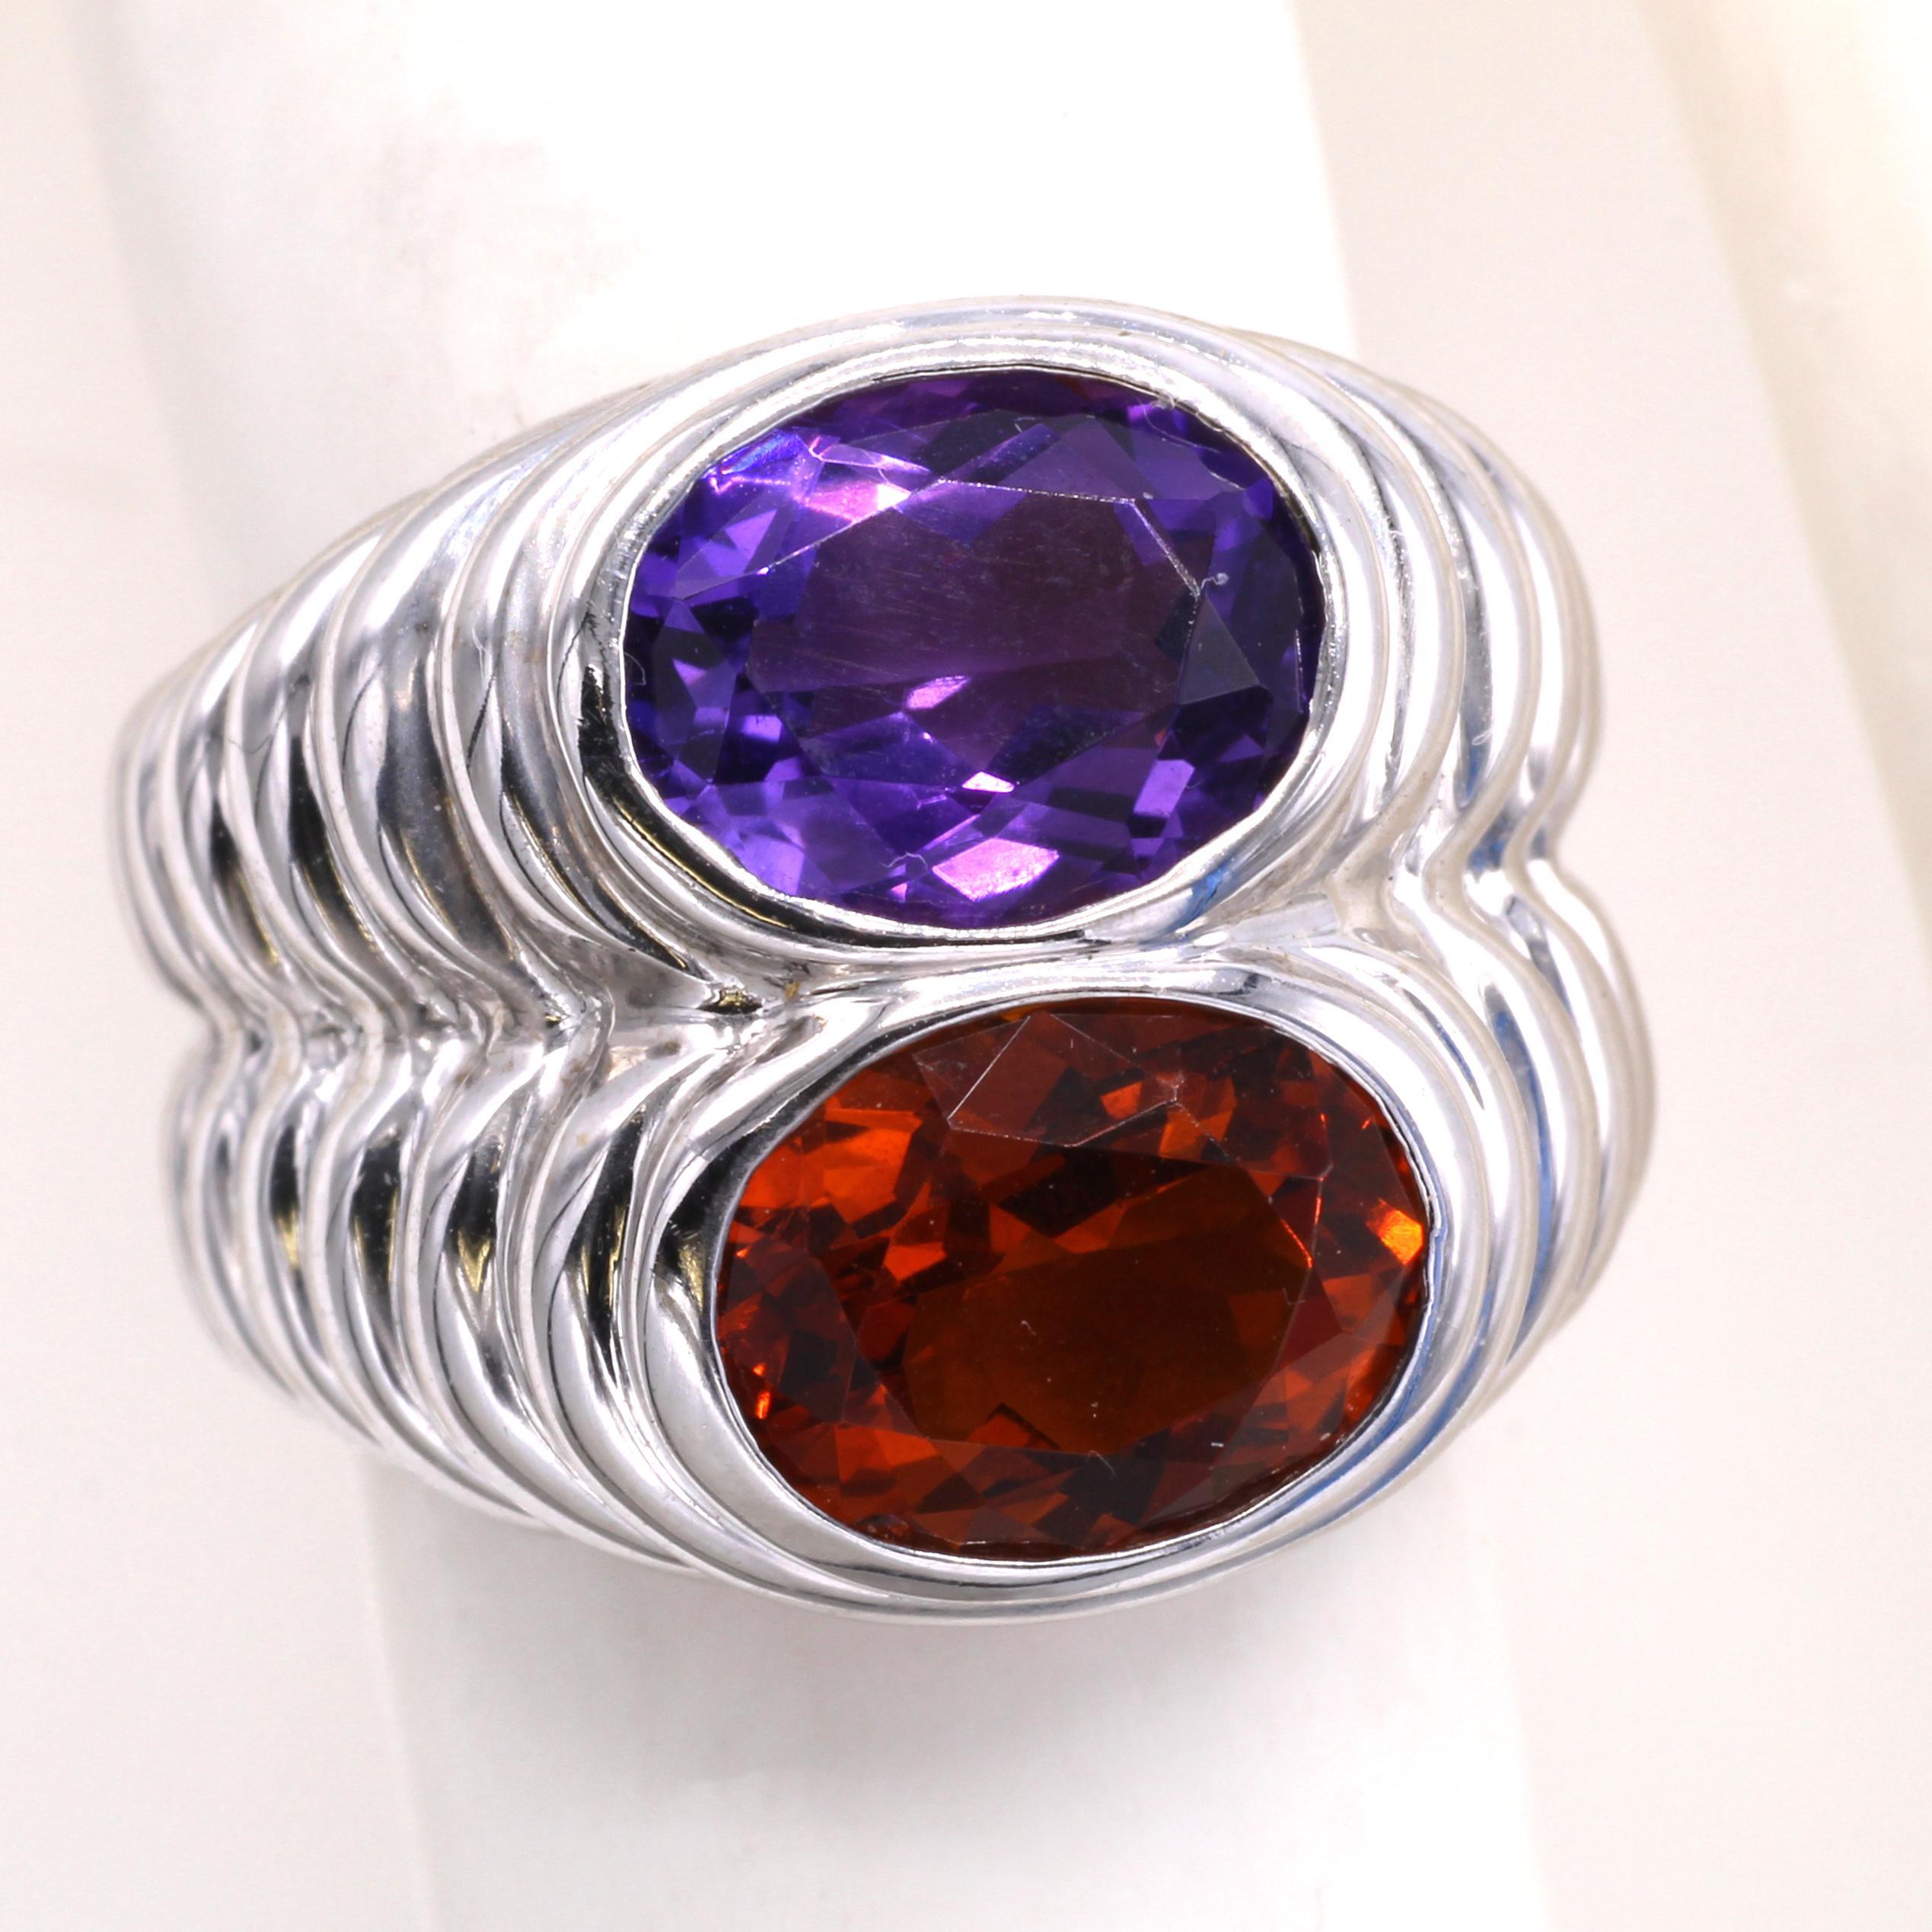 Beautifully designed and masterfully handcrafted by the famous Italian jeweler Bulgari, this ring features a vibrant deep orange Citrine and a strongly saturated velvety purple Amethyst , perfectly cut into matching ovals. This bold and fashionable